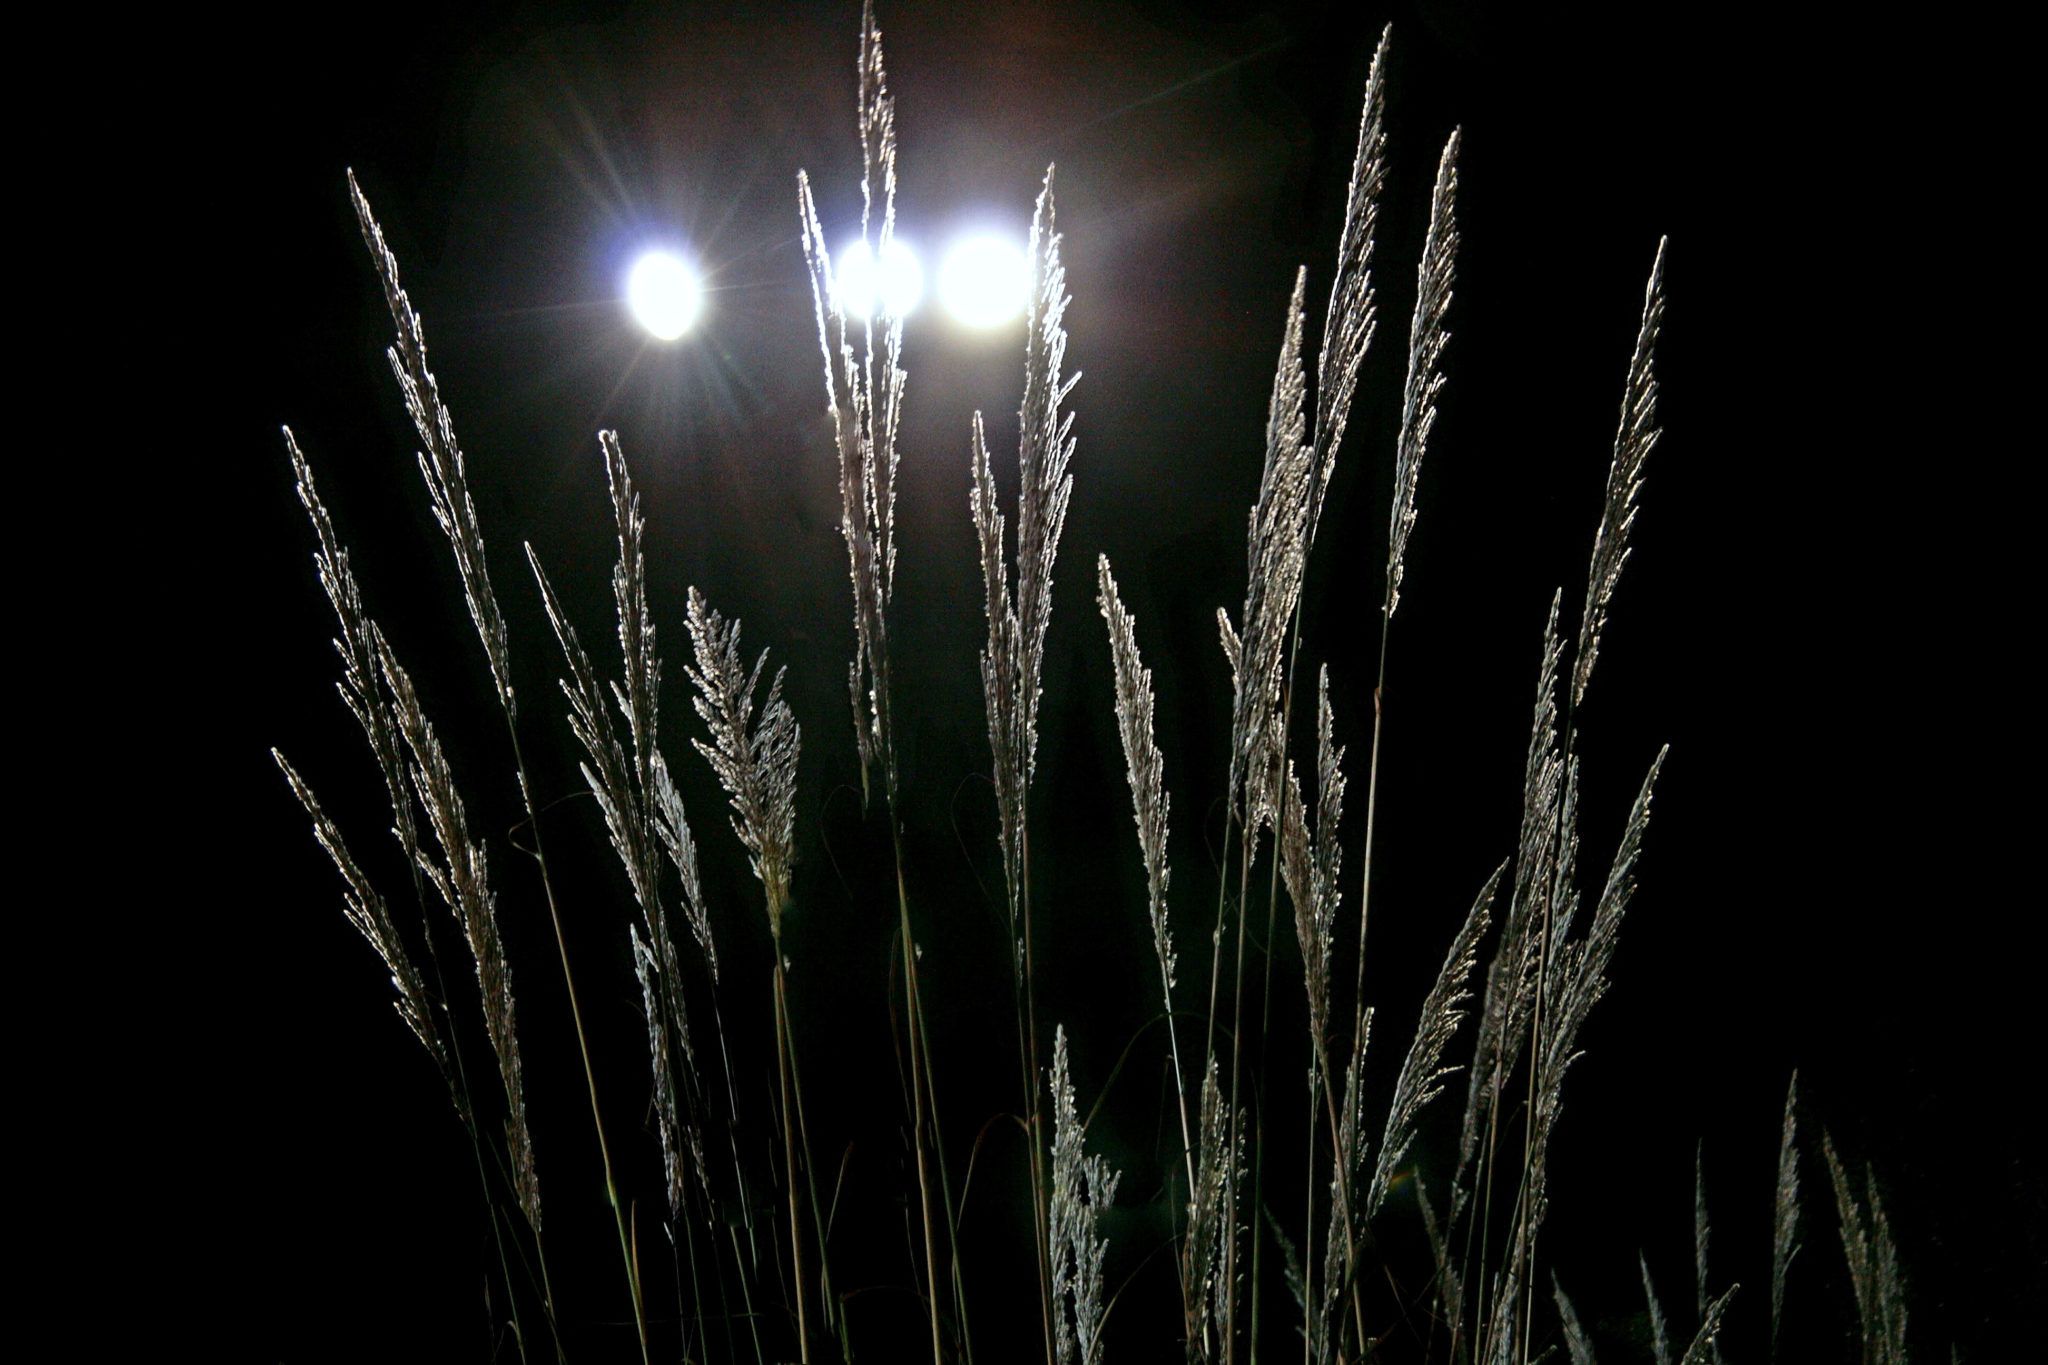 mysterious lights shining through a bushel of reeds at night time